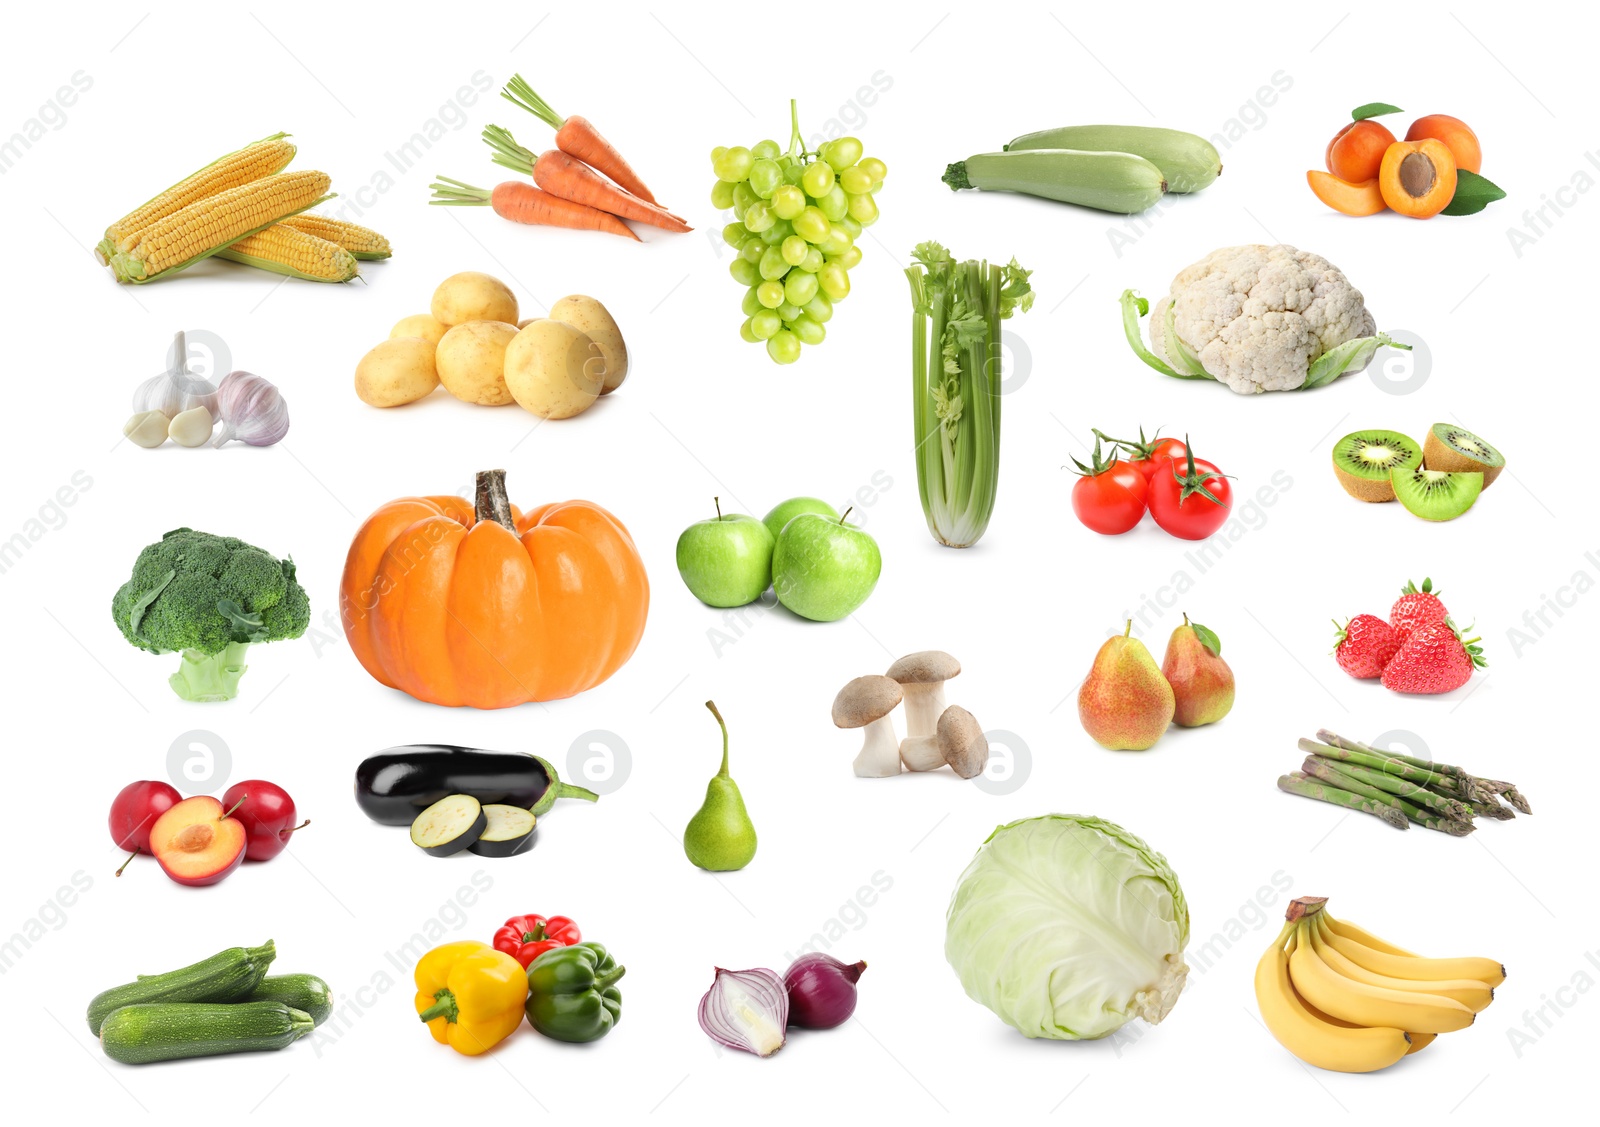 Image of Healthy diet. Set with many different fruits and vegetables on white background